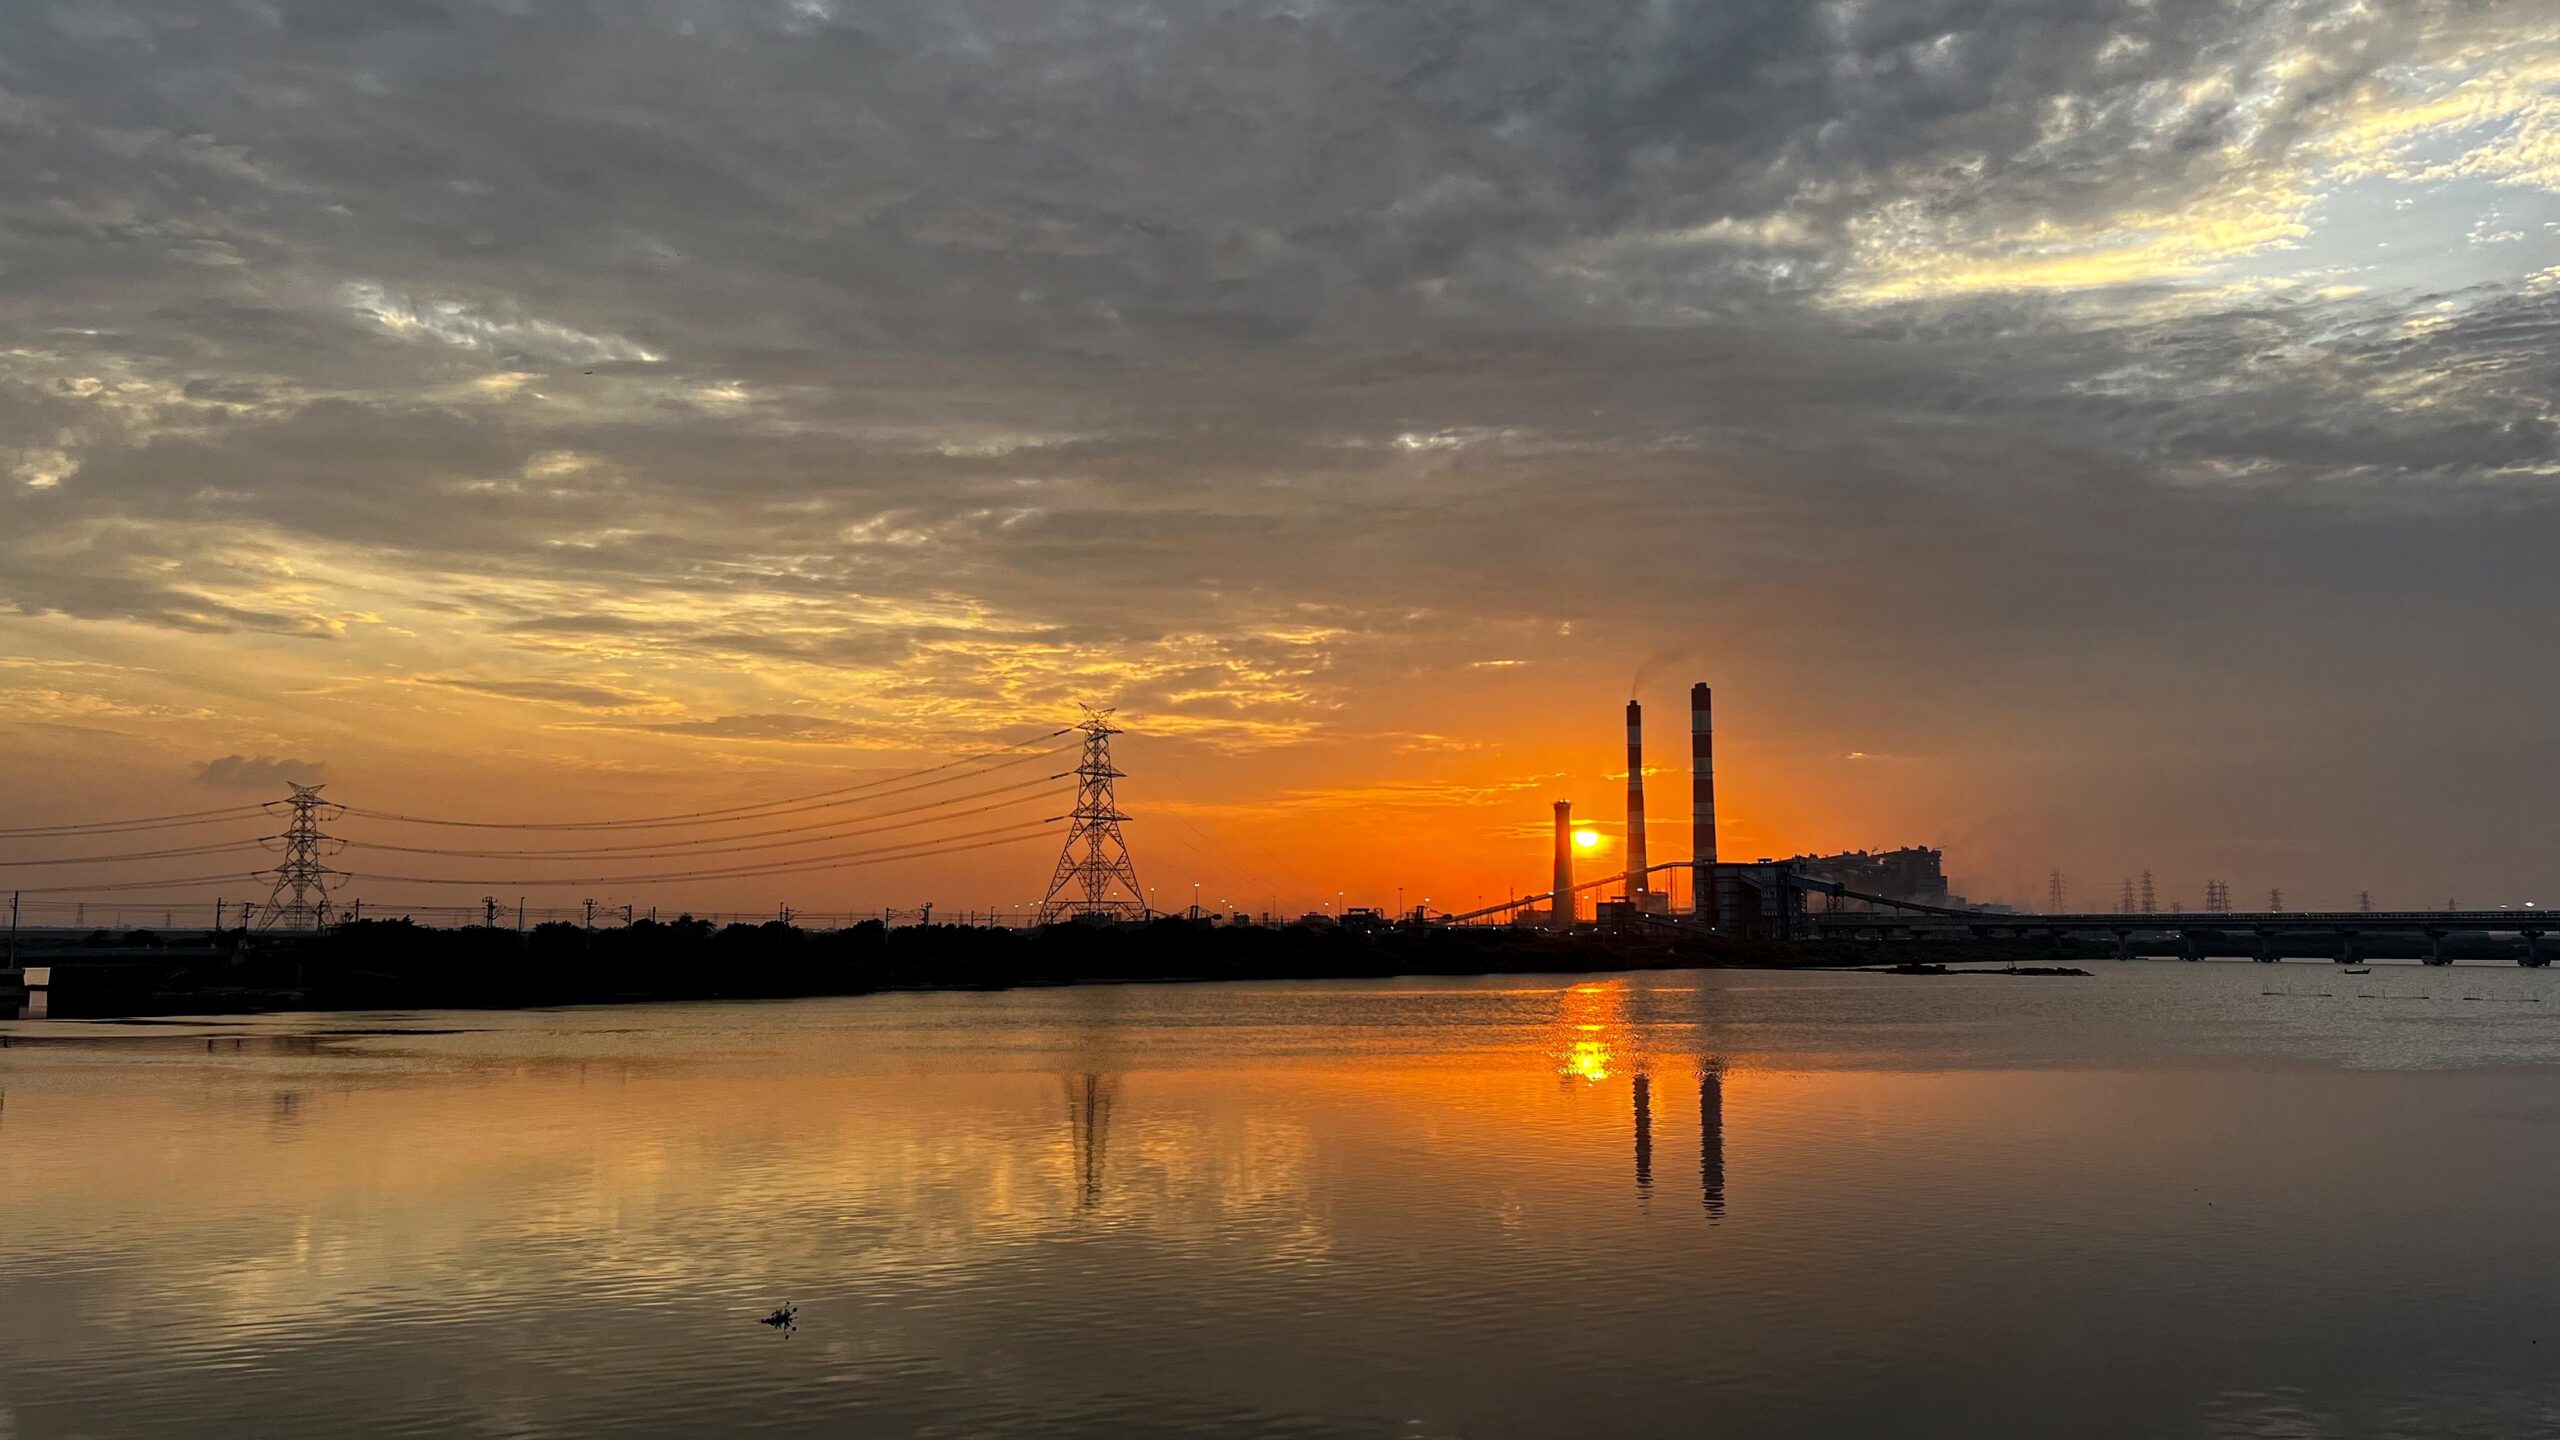 Sunset seen in power station area